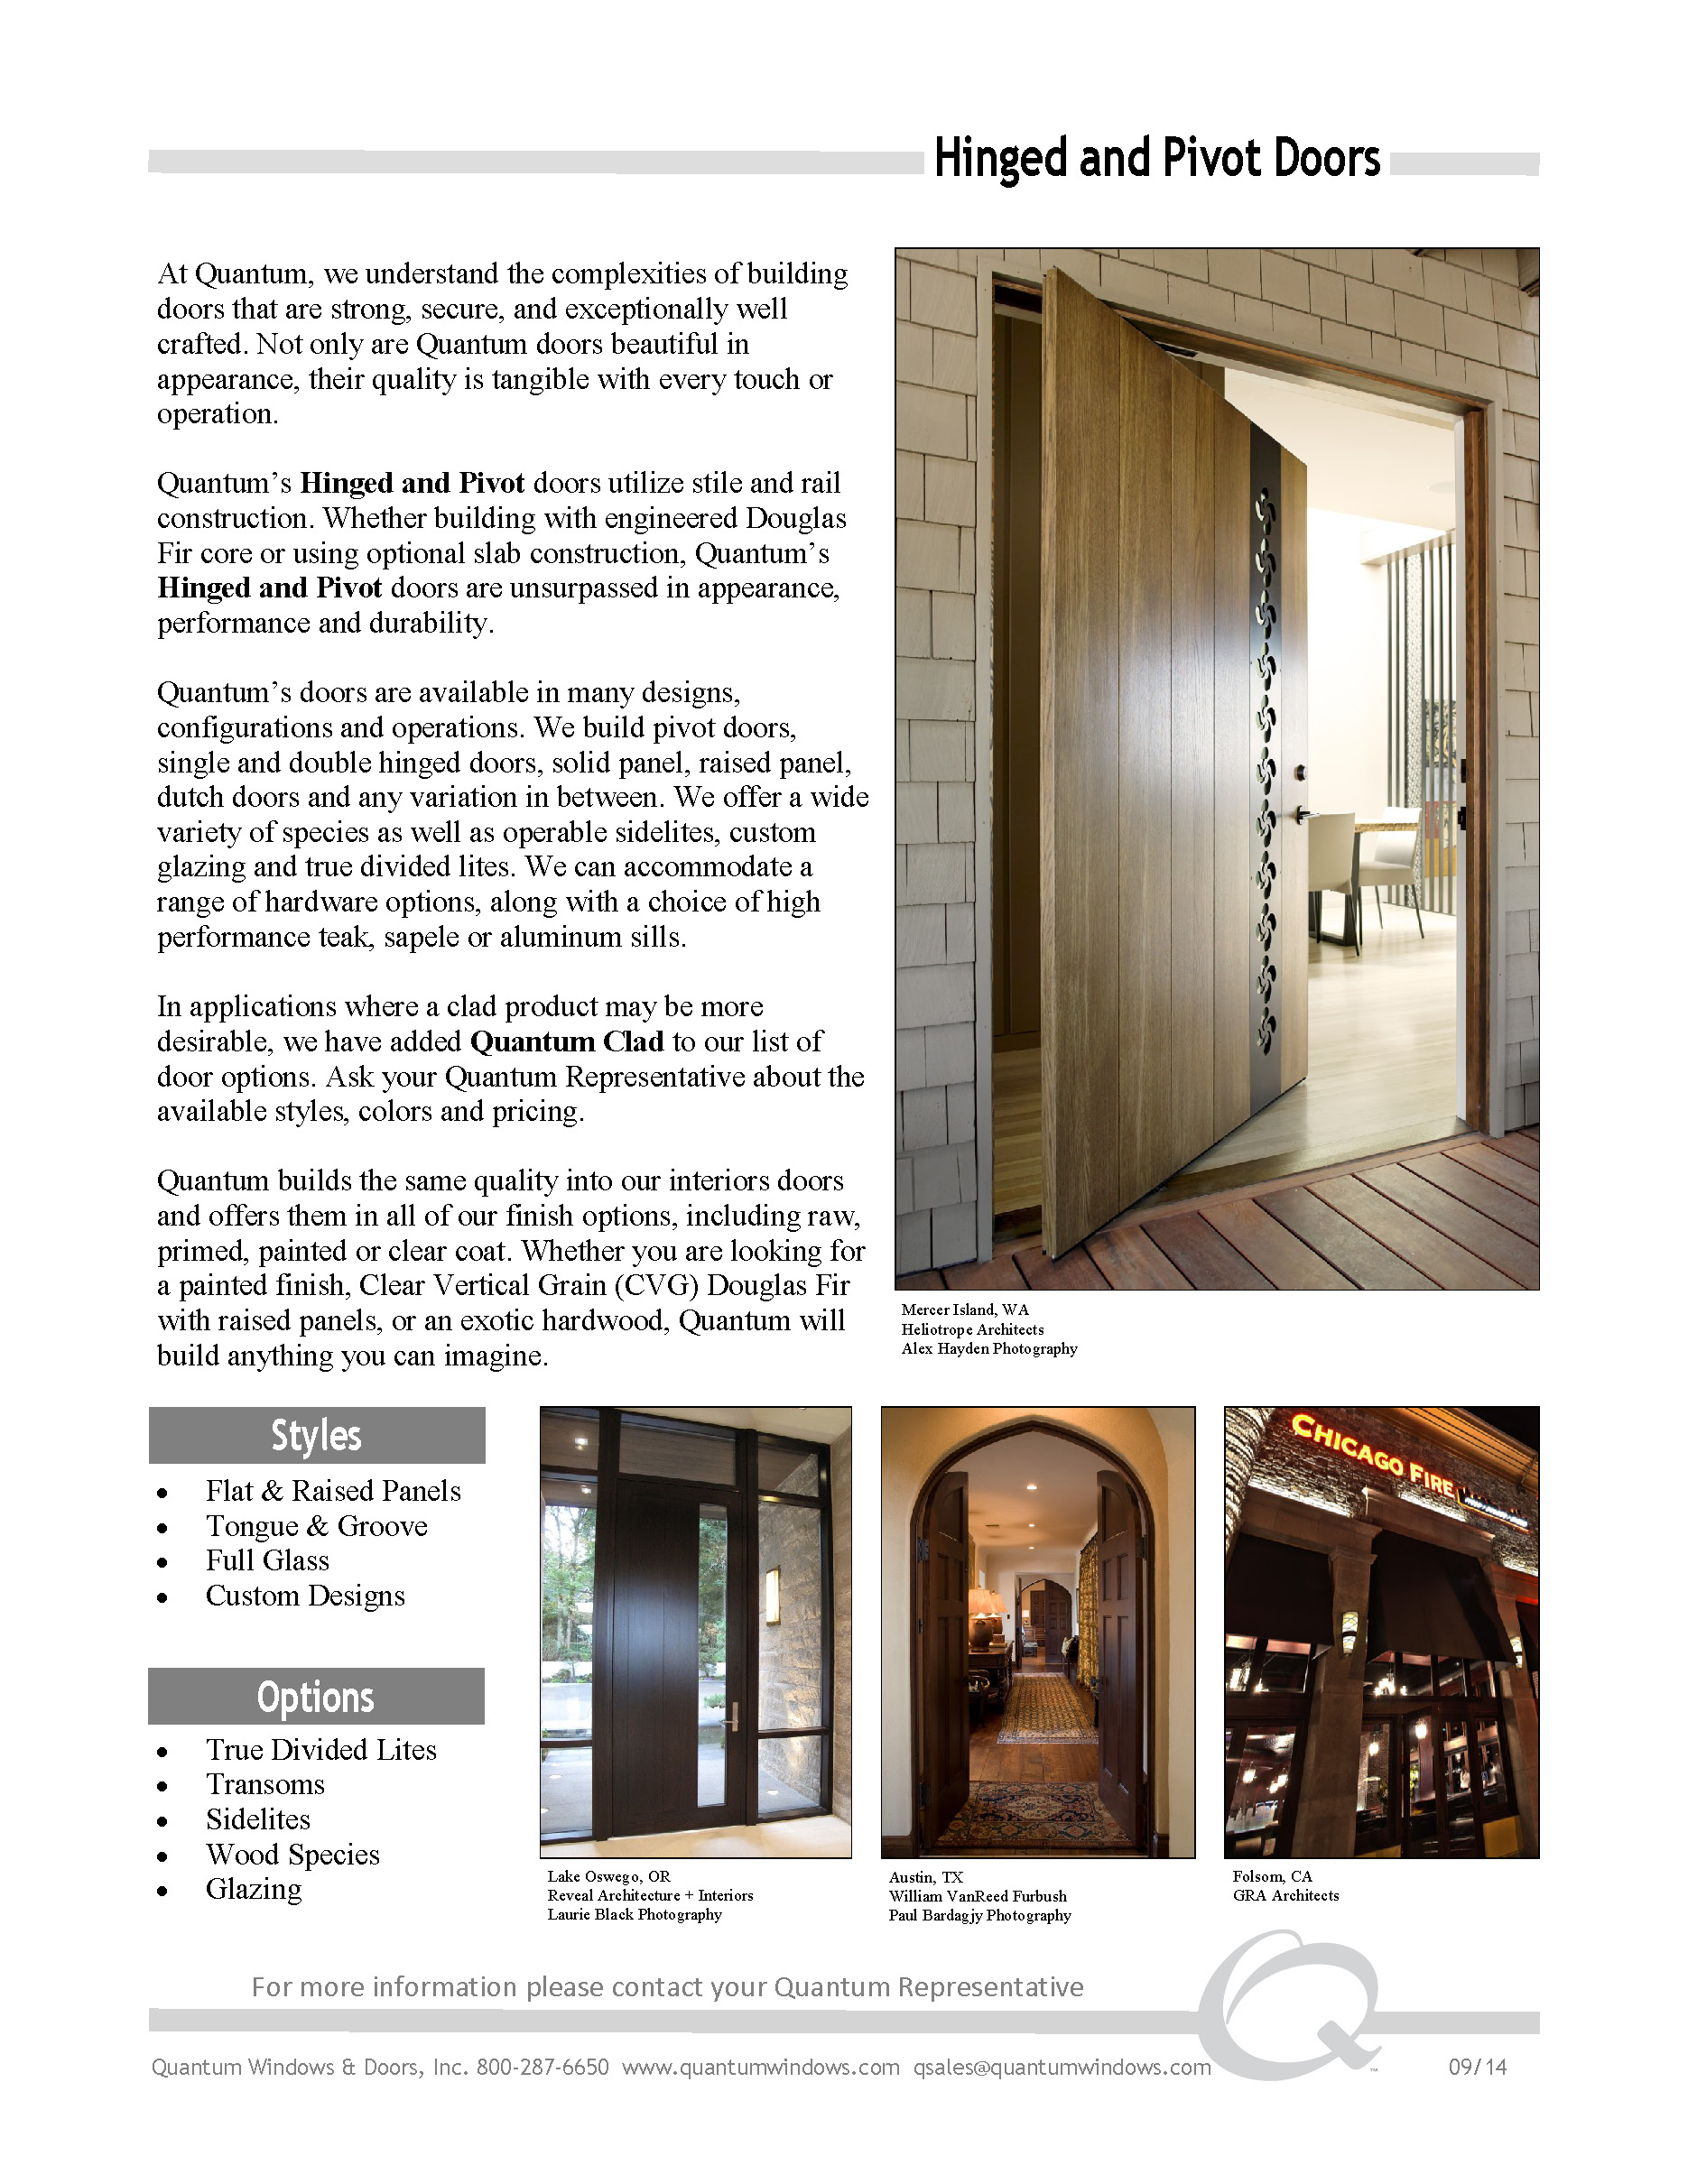 QWD Hinged and Pivot Doors Page 1